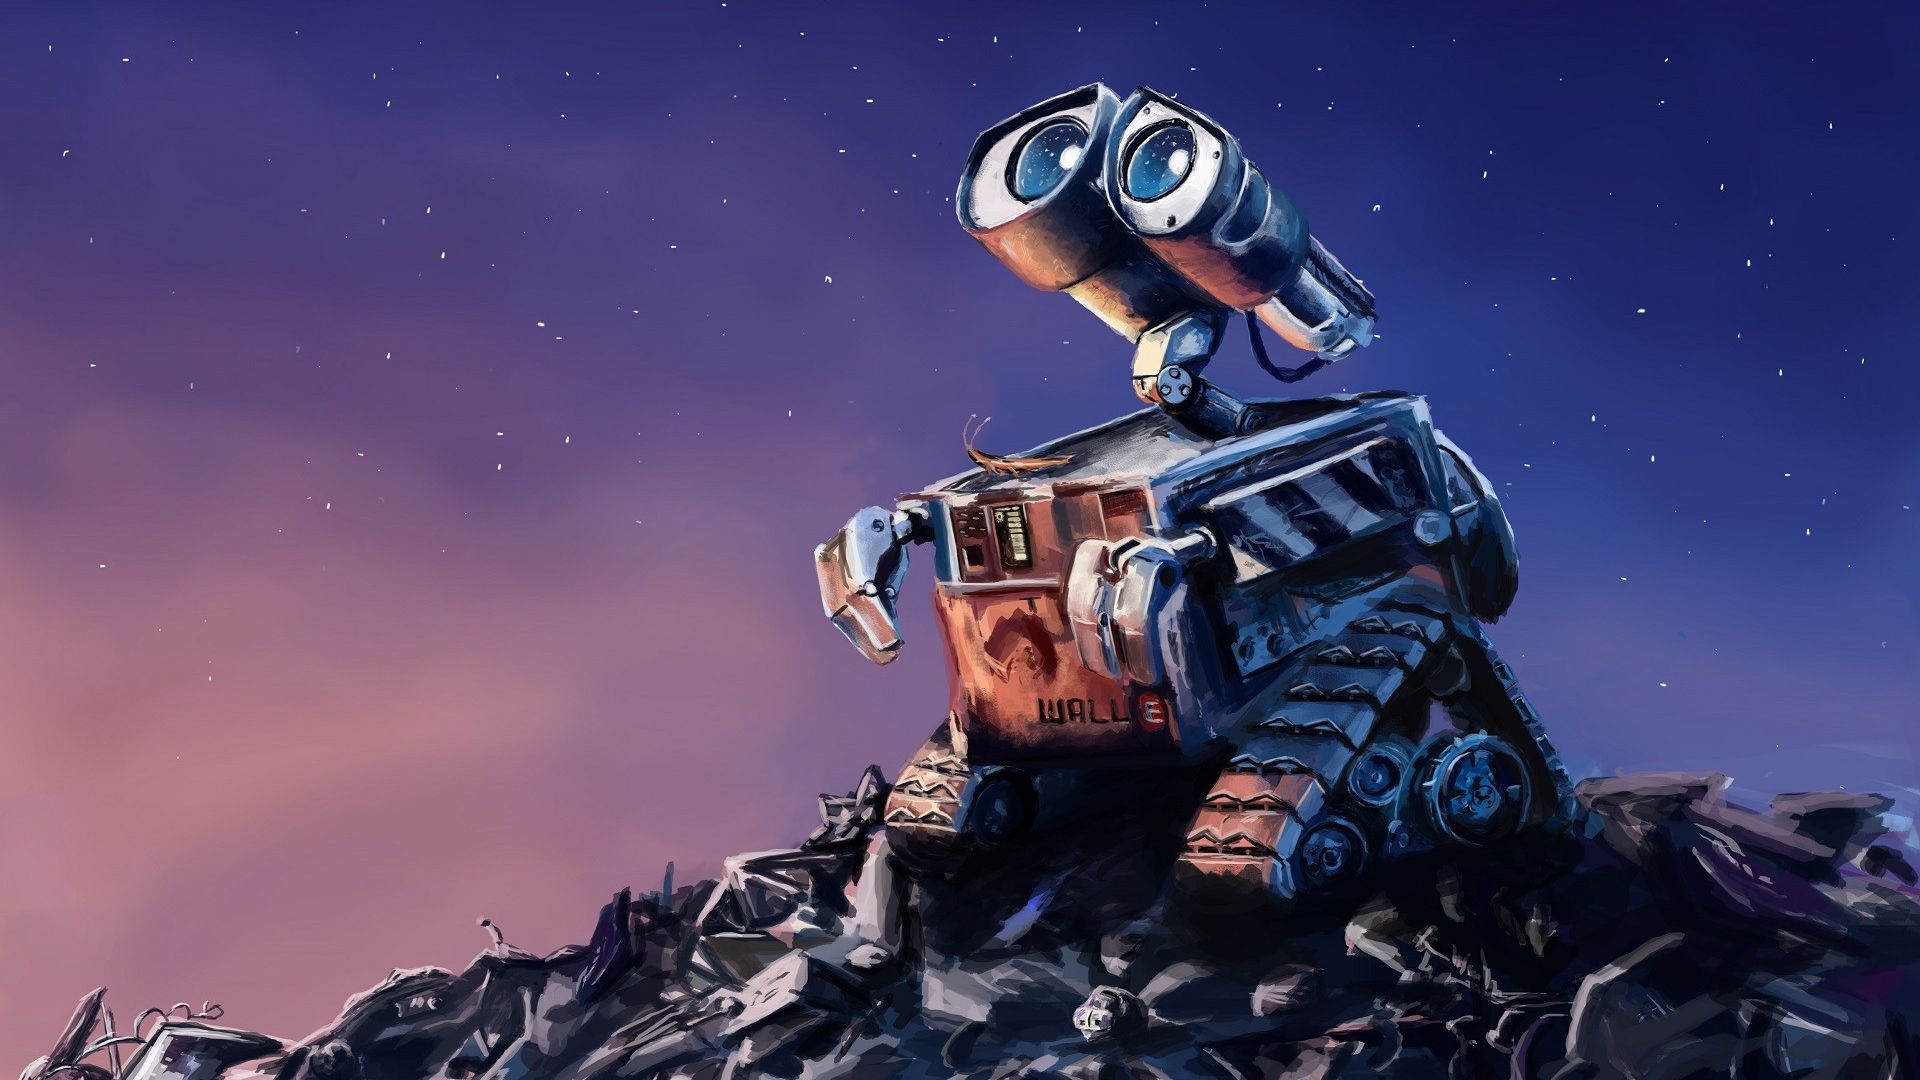 Desktop Wallpaper Wall E, Robot, Animated Movie, Hd Image, Picture,  Background, 45pko0